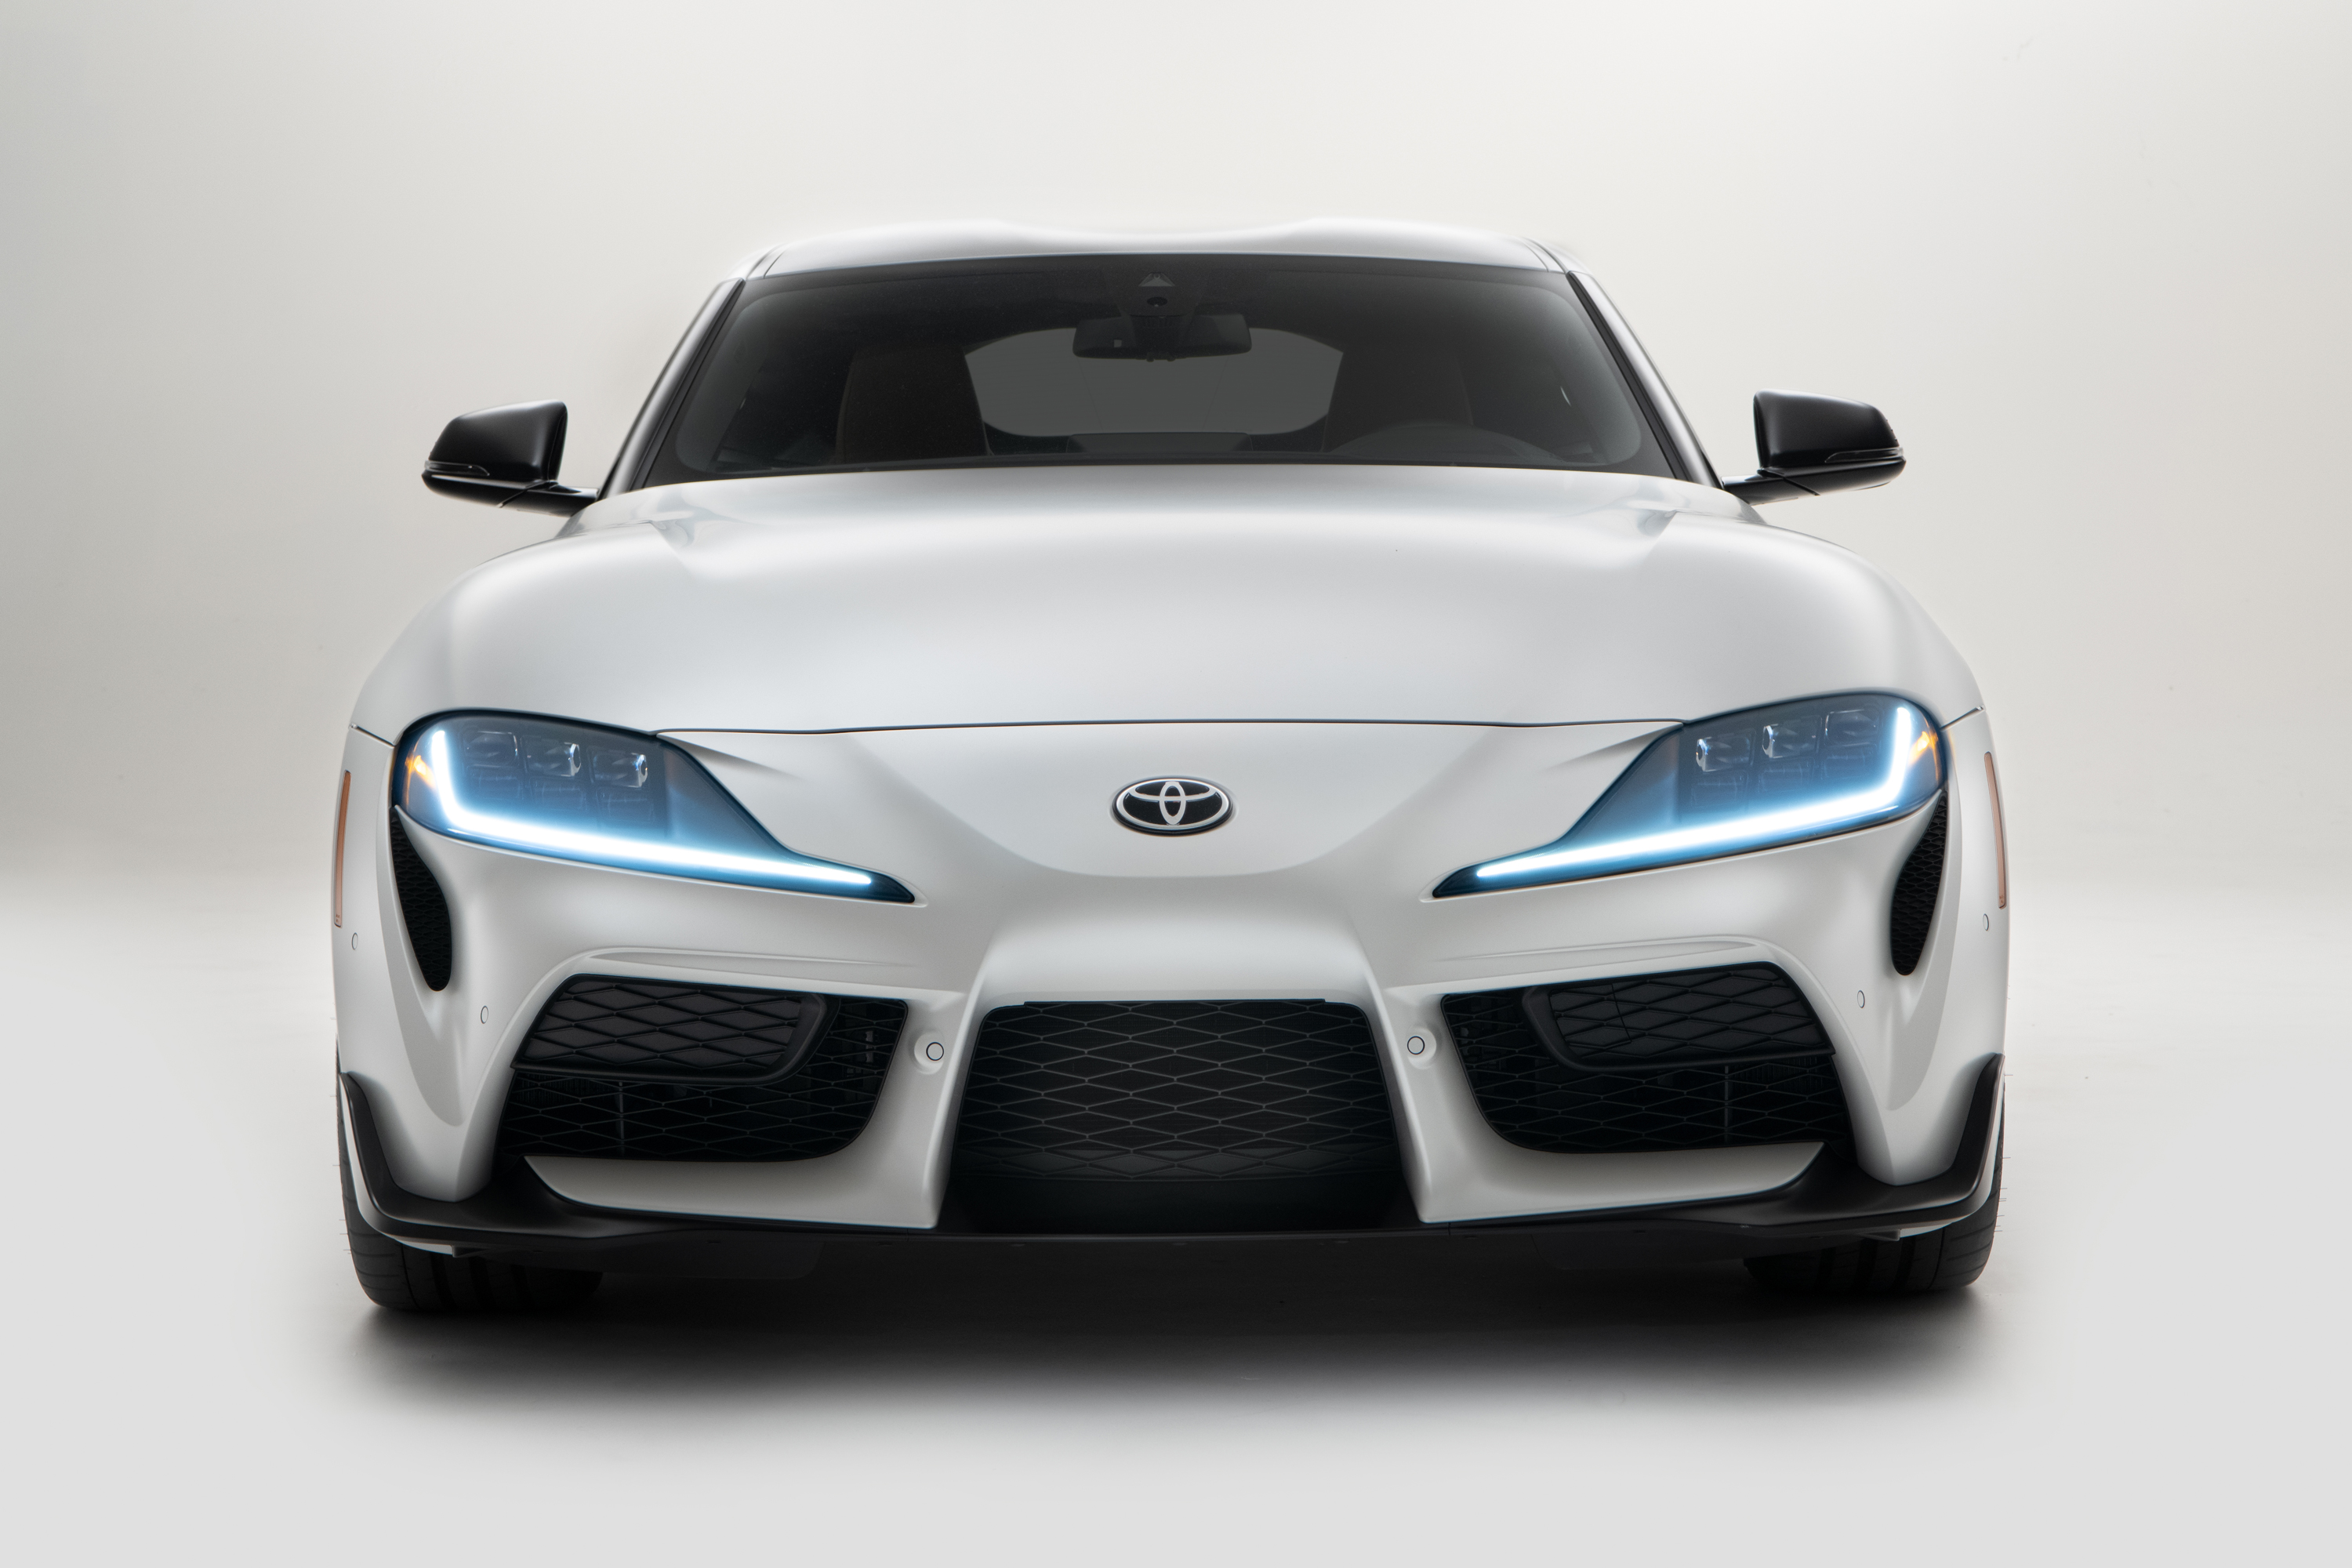 Toyota Adds a Manual Transmission Option to the 2023 GR Supra